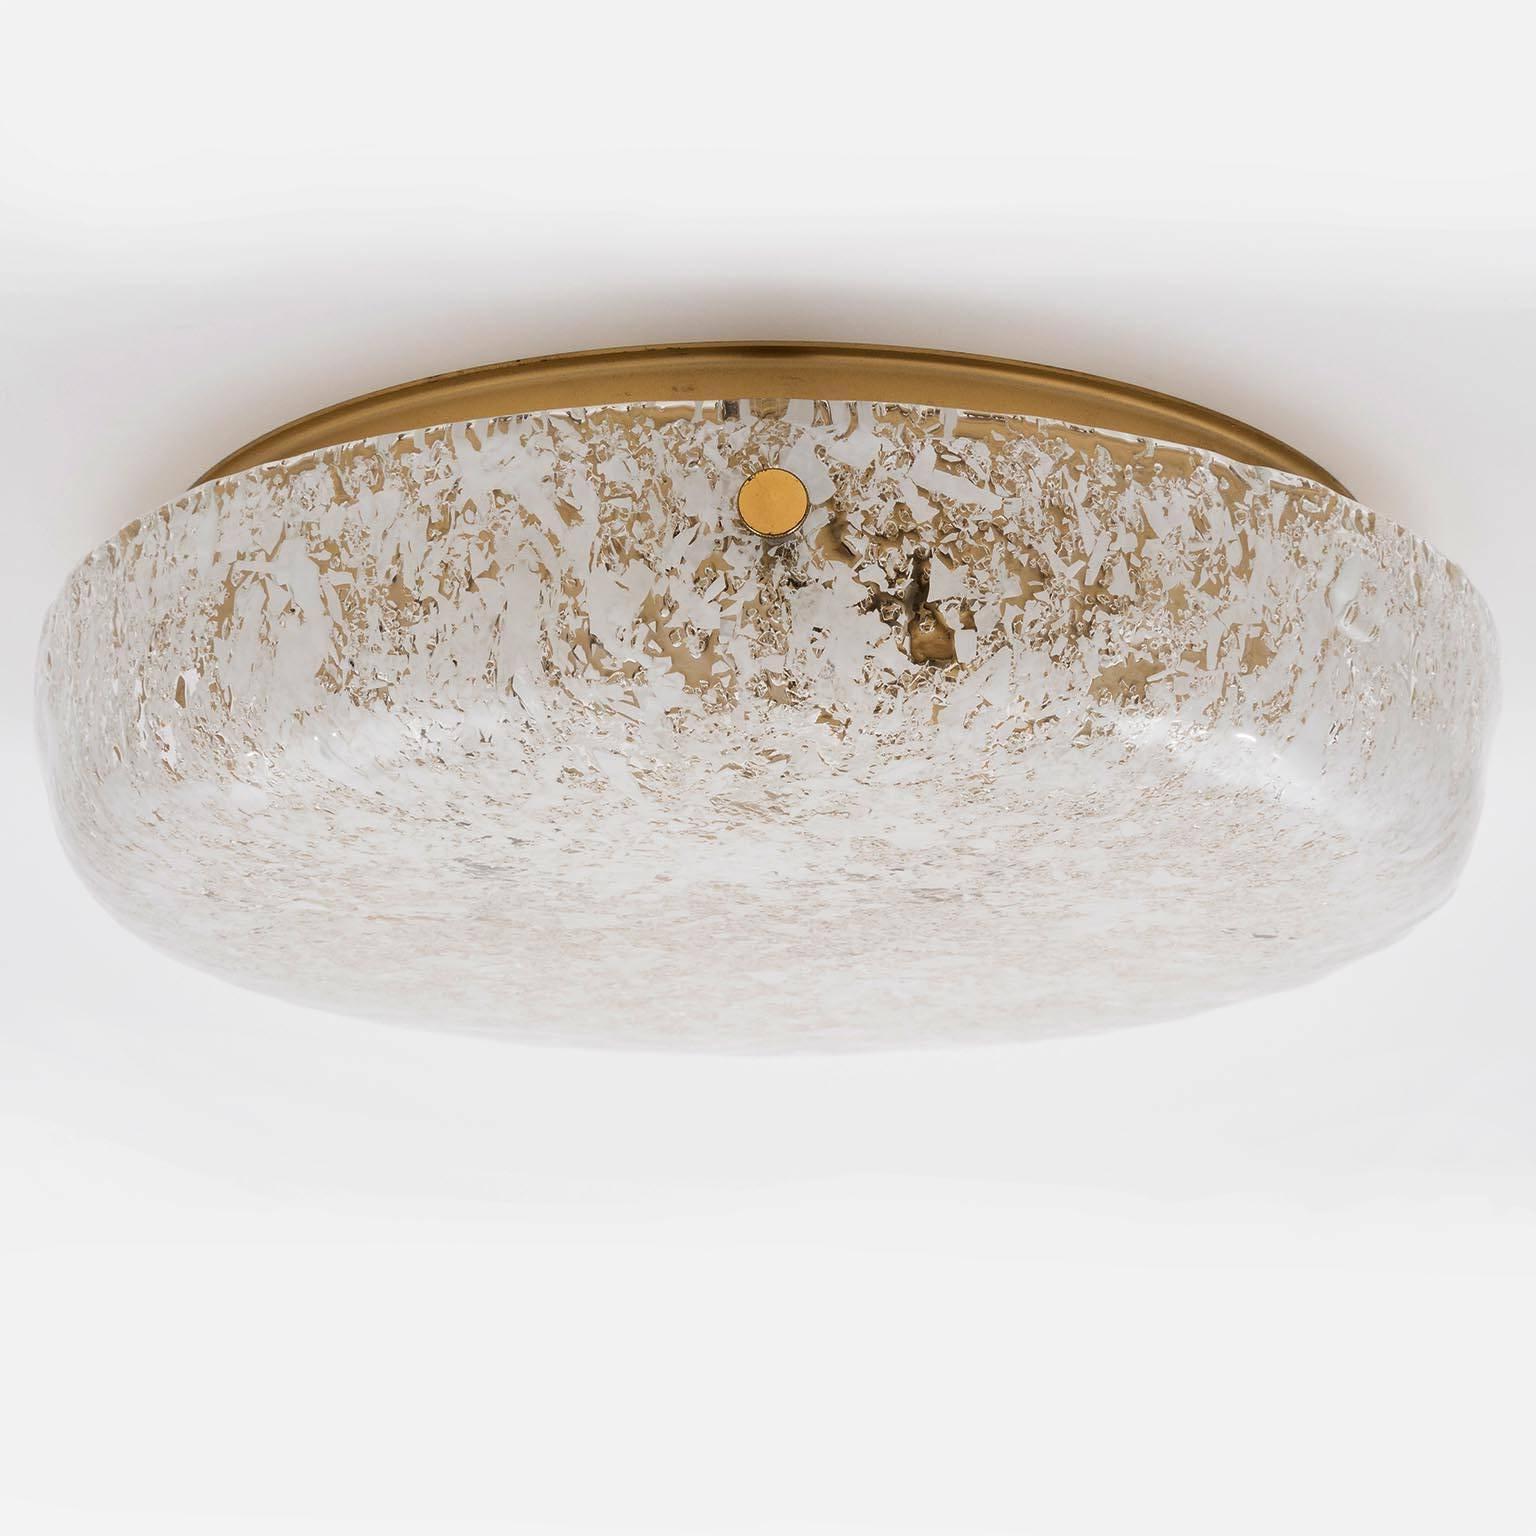 Frosted One of Two Hillebrand Flushmount Light Fixtures or Sconces, 1960s